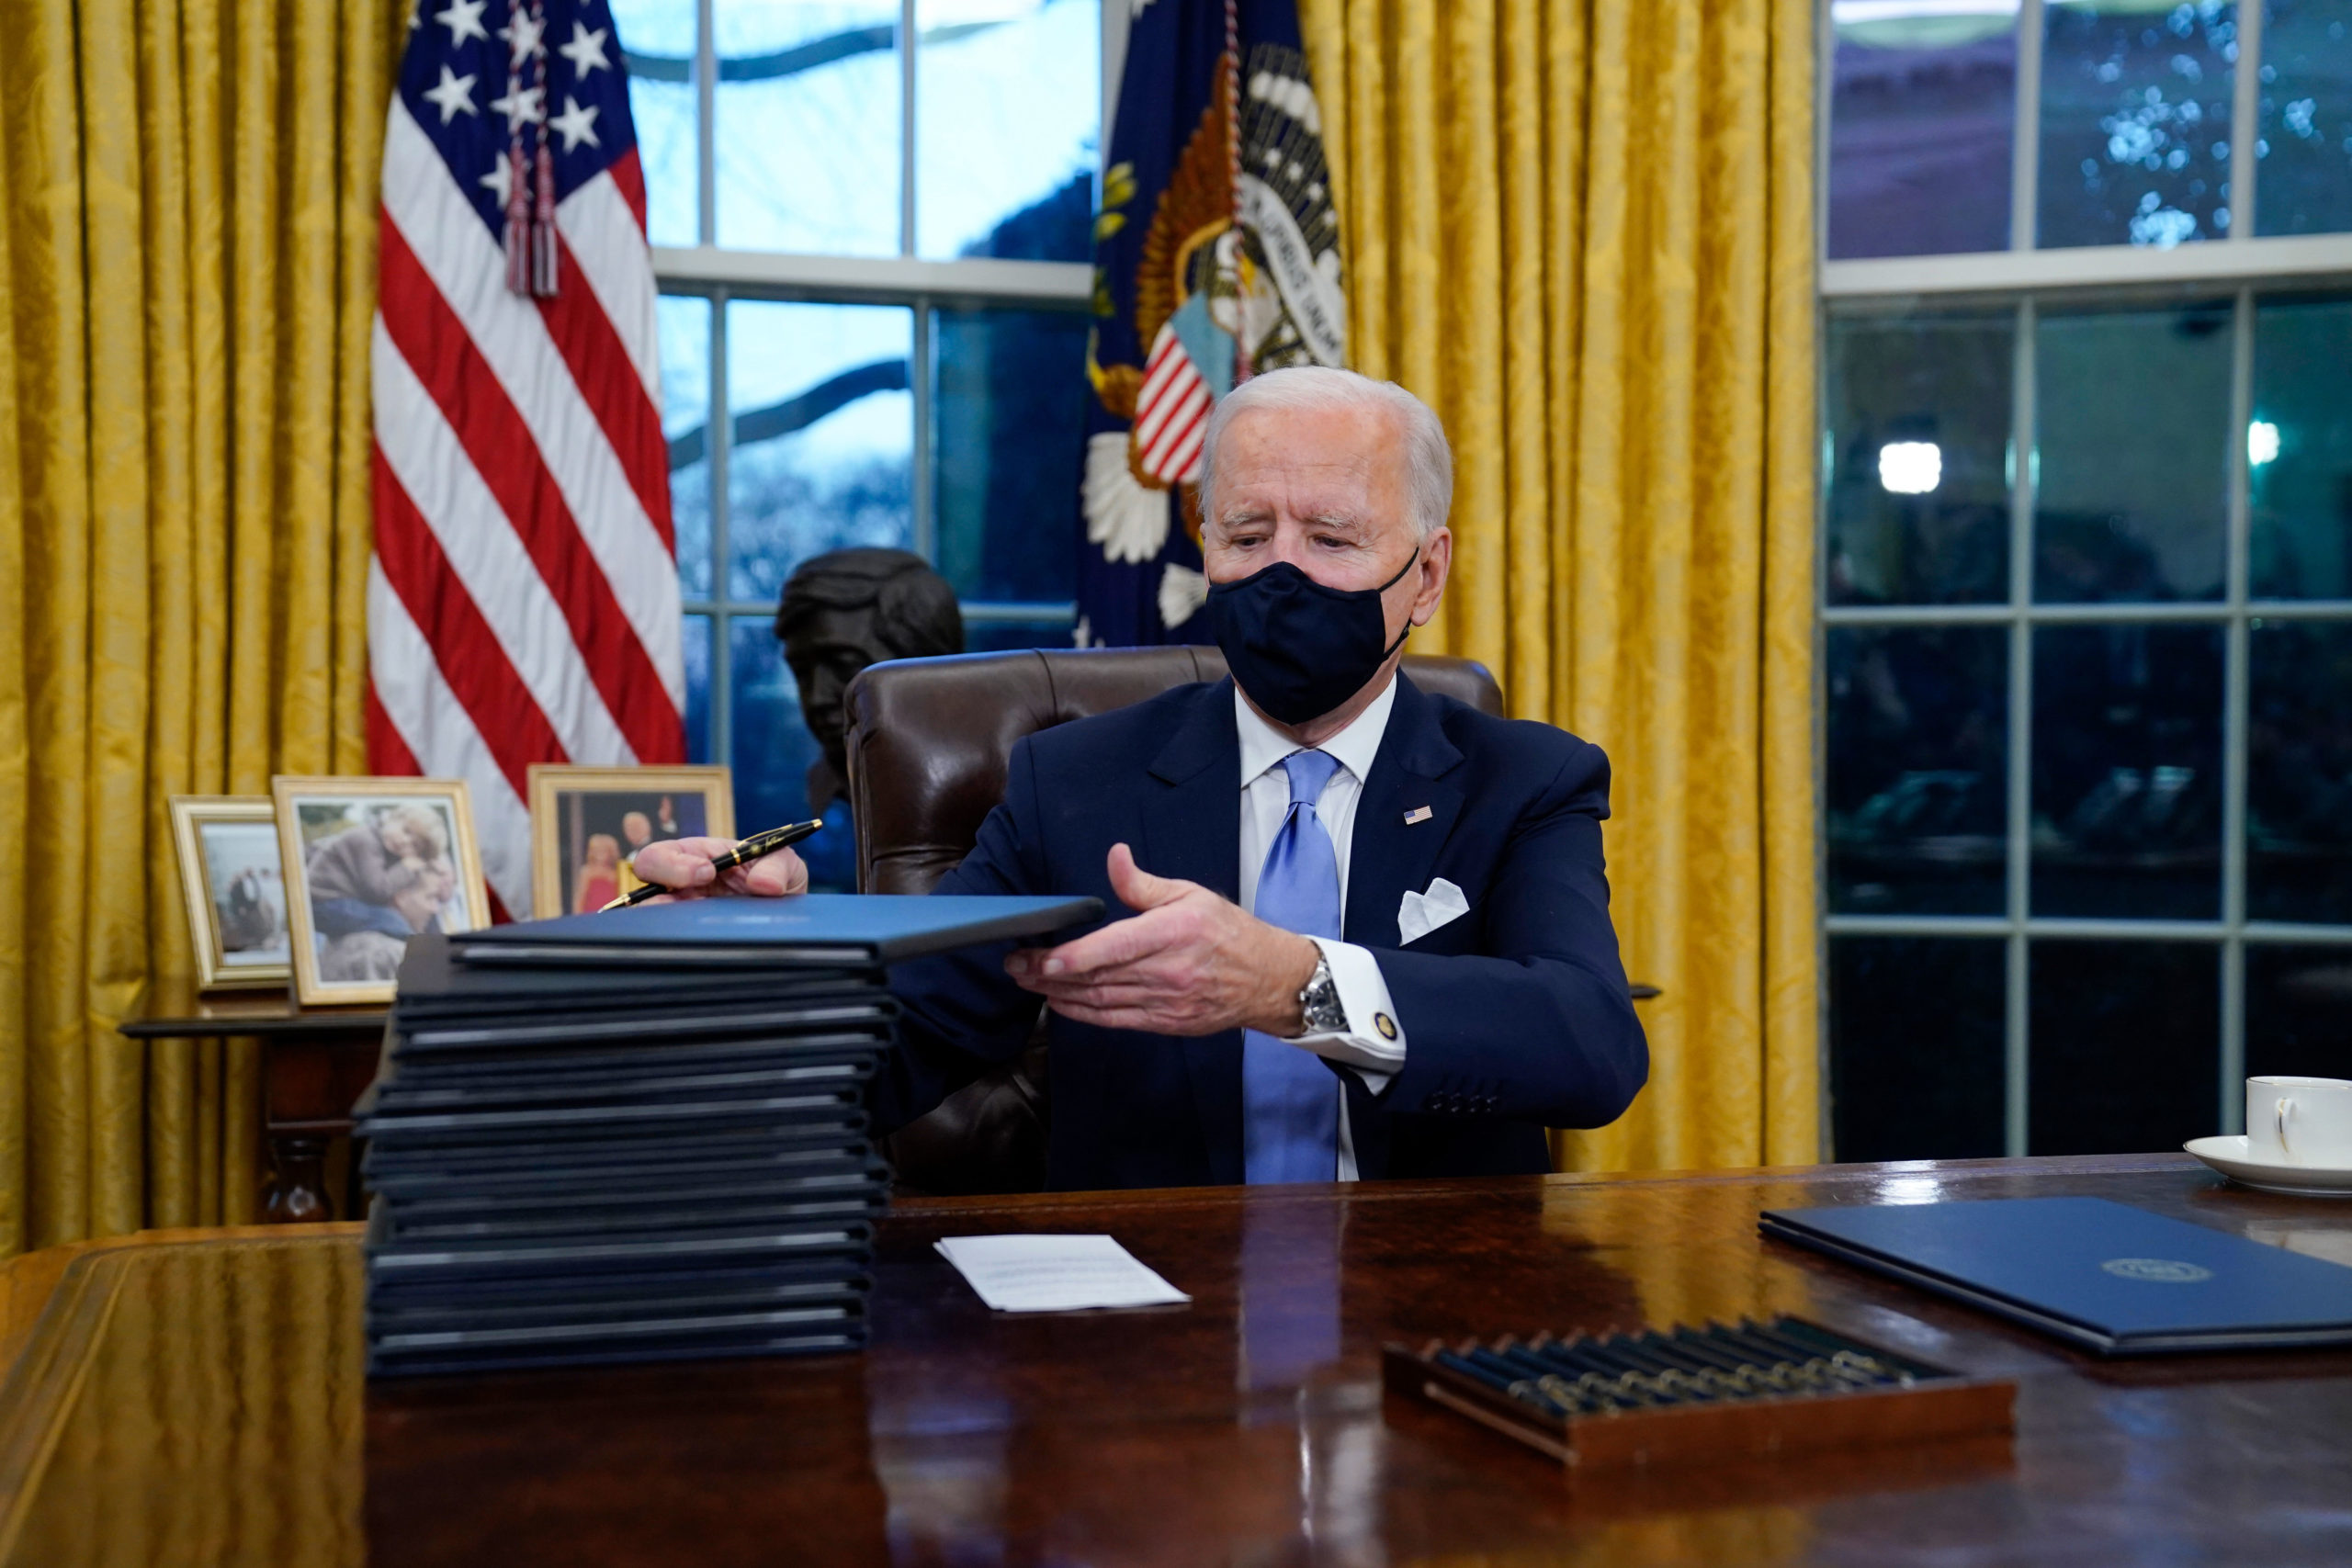 Biden signed 30 executive orders in his first 3 days as President